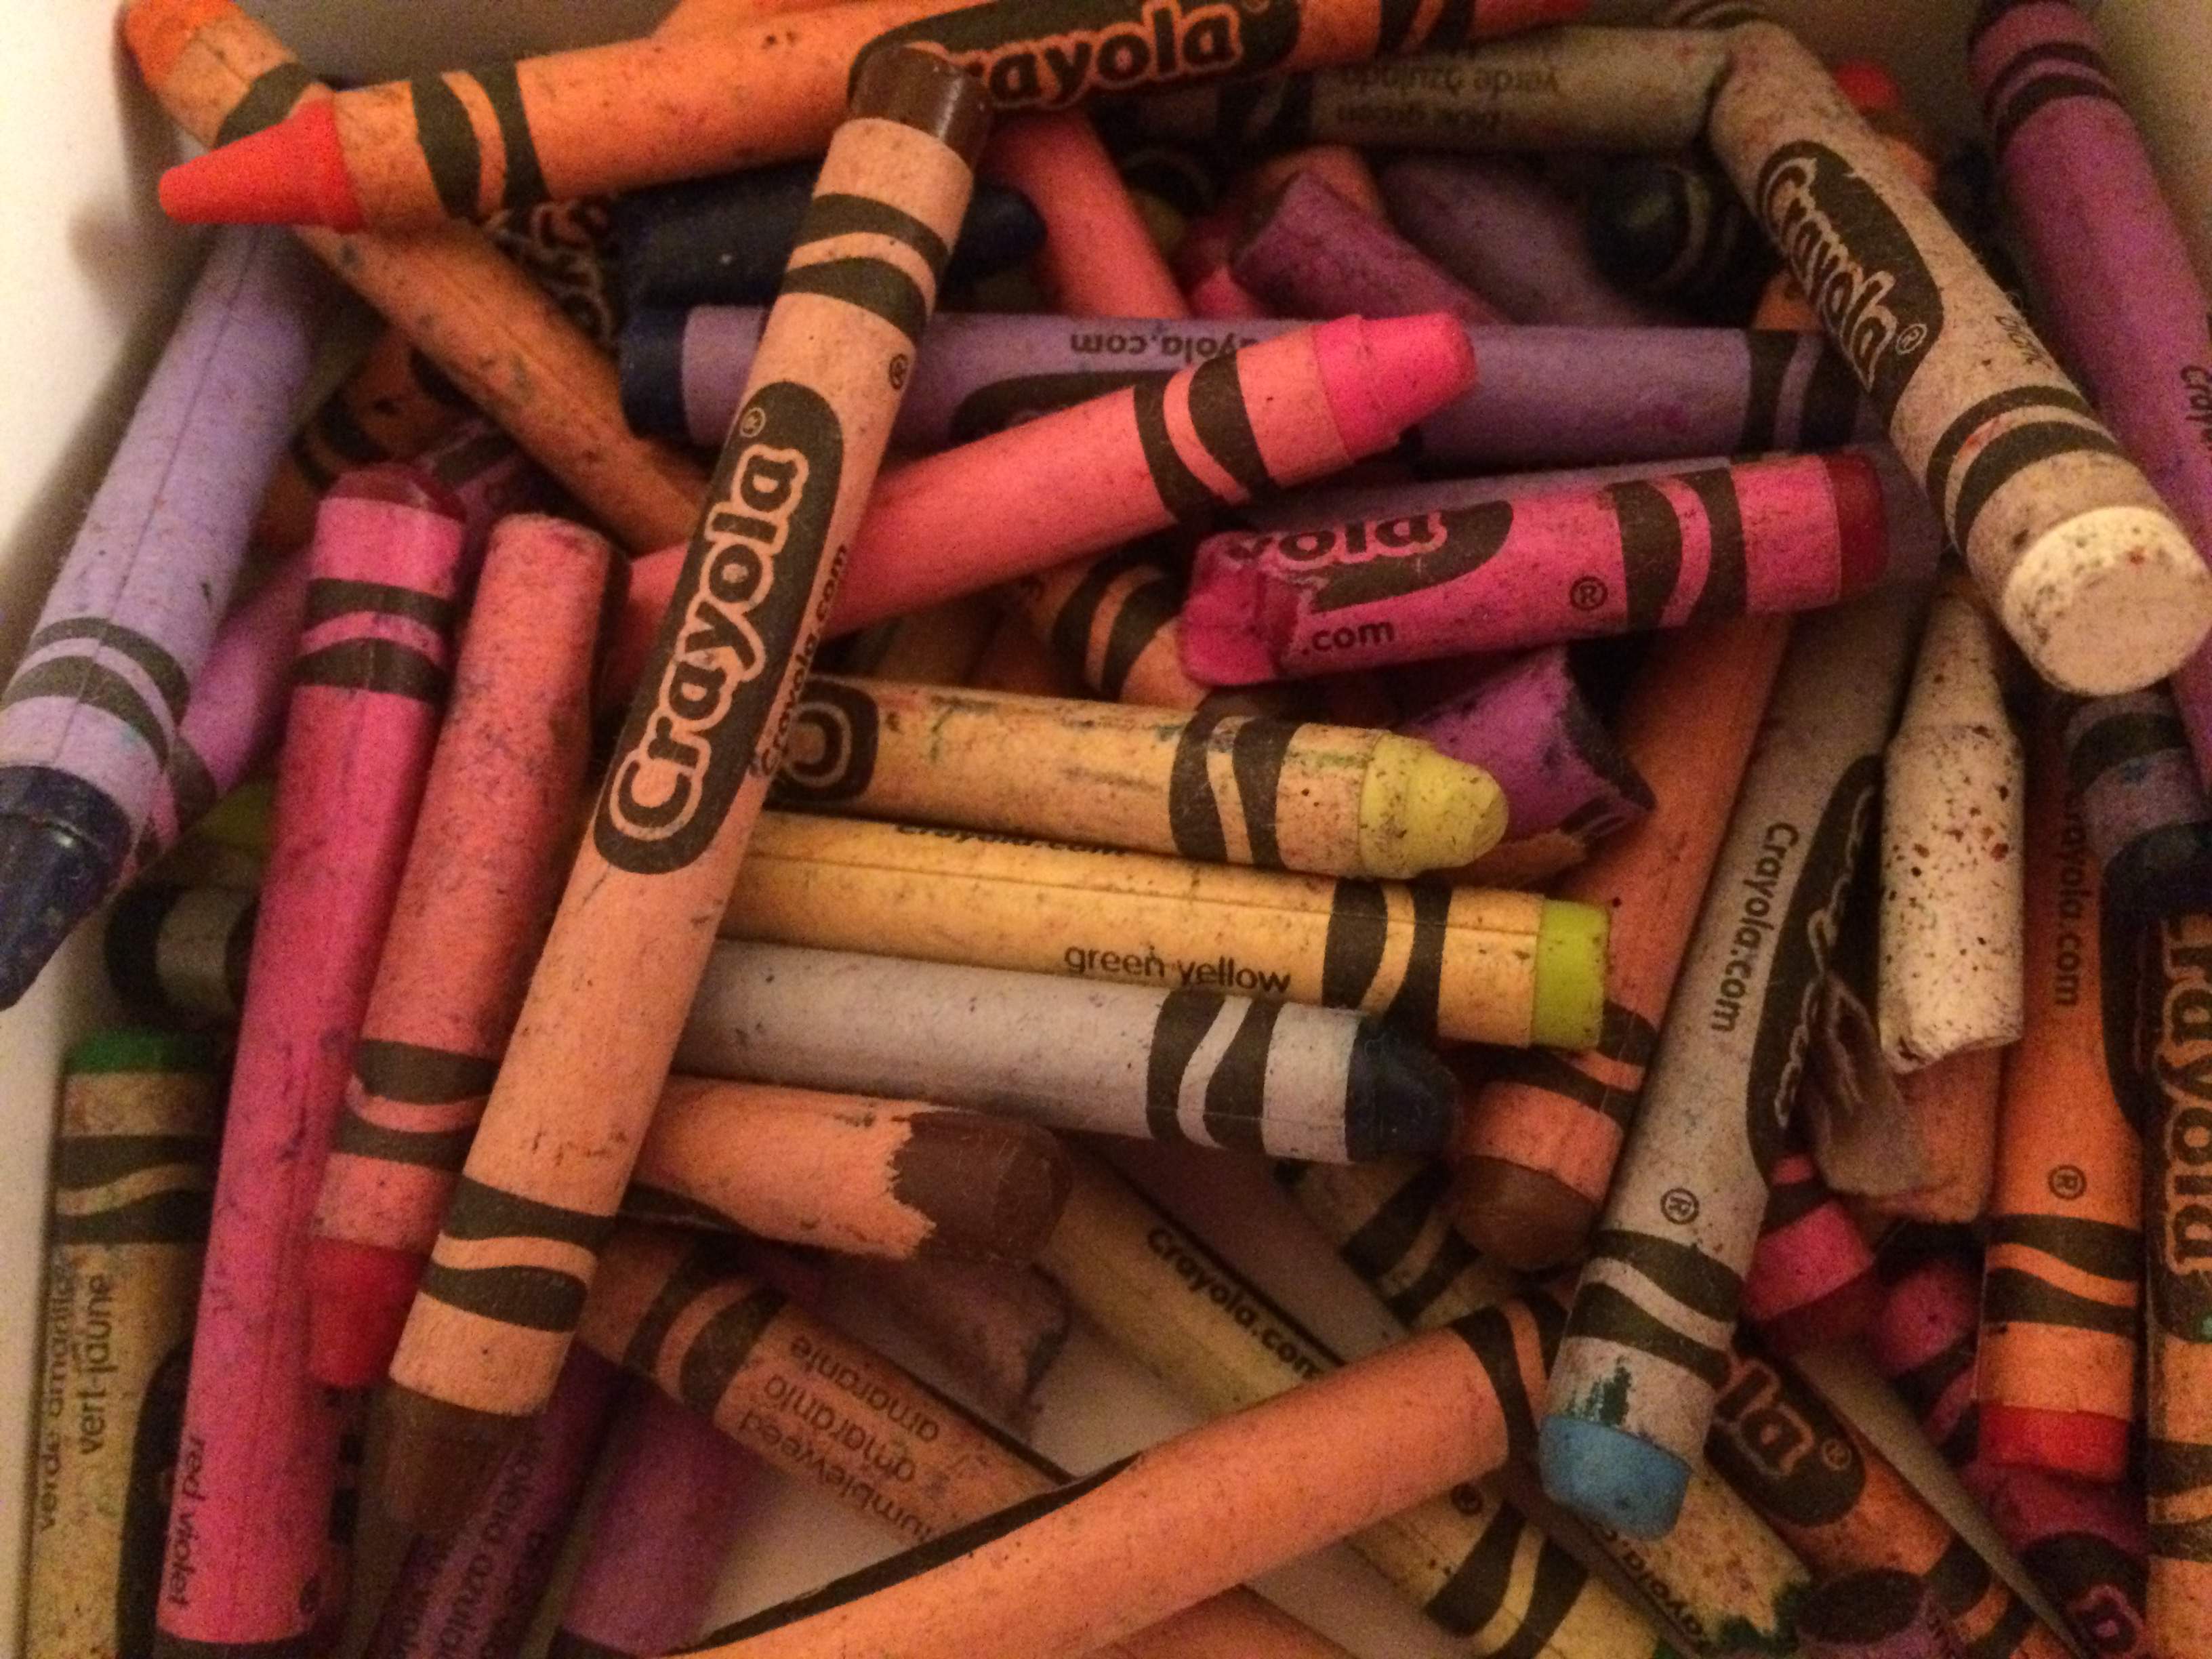 The life of a crayon